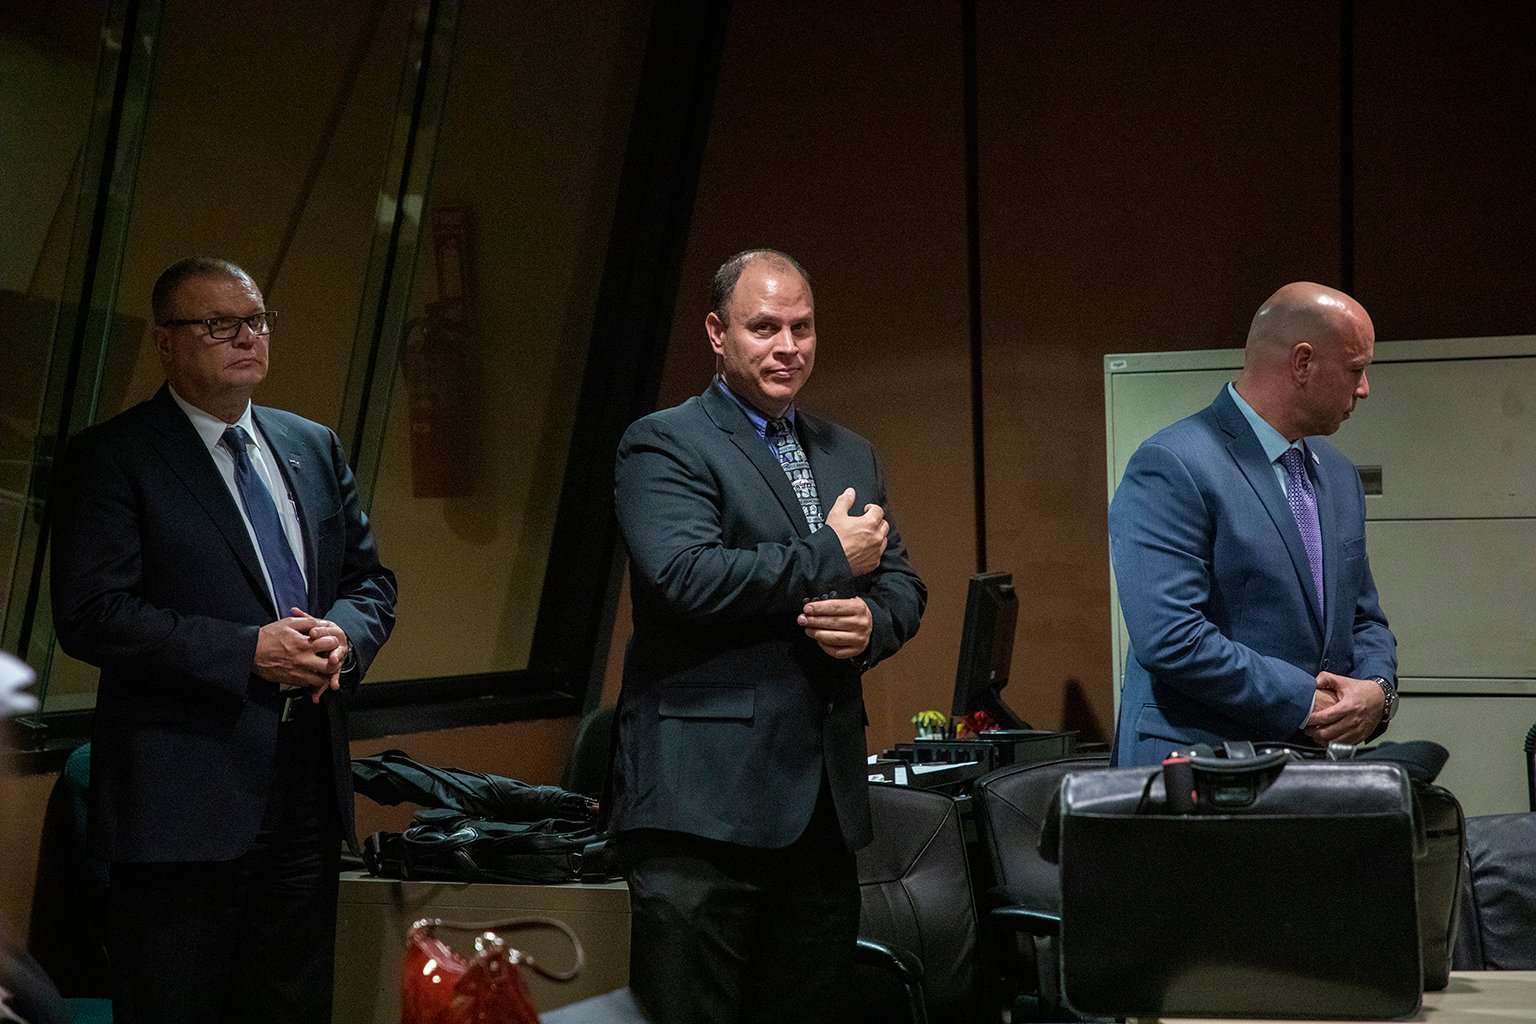 From left: Former Chicago Detective David March, officer Thomas Gaffney and former officer Joseph Walsh attend a pretrial hearing Tuesday, Oct. 30, 2018. (Zbigniew Bzdak / Chicago Tribune / Pool)